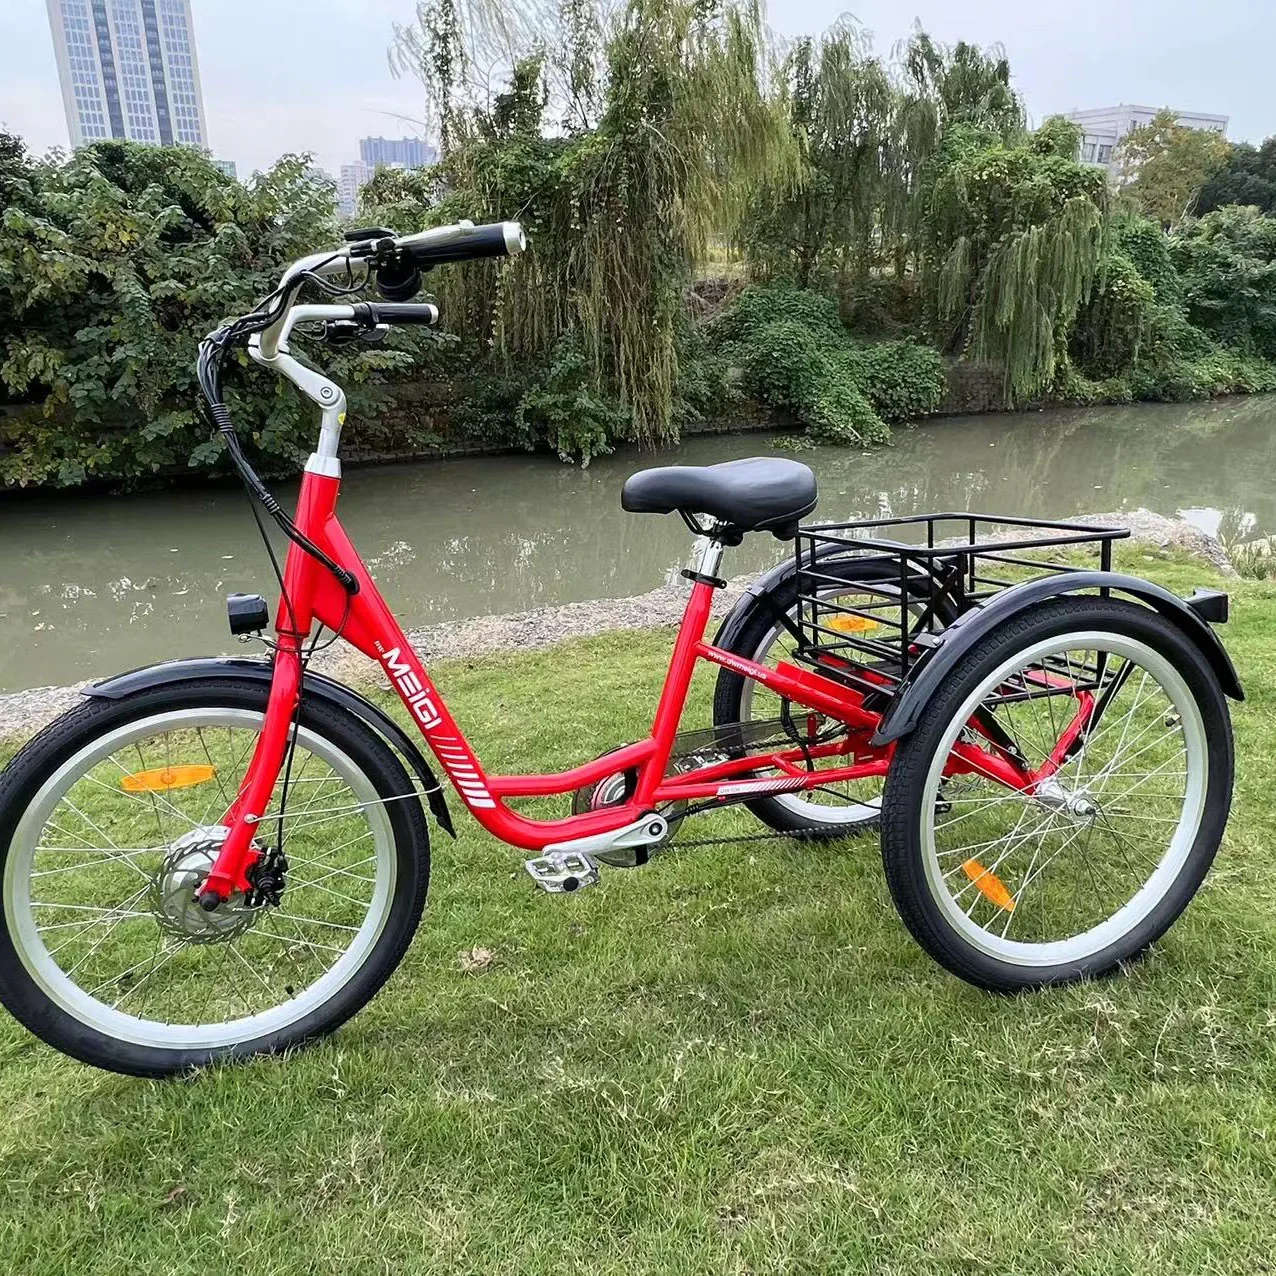 MEIGI Good Quality Urban E Tricycle  350W Motor Cargo Delivery Ebike 3 Wheel Electric Tricycle For Adults custom good quality plc motor sgmjv 08ade6s sgmjv 08add6e sgmjv 04ade6e sgmjv 04ade6s sgmjv 01aaa61 sgmjv 08ade6e sgmjv c2ada21